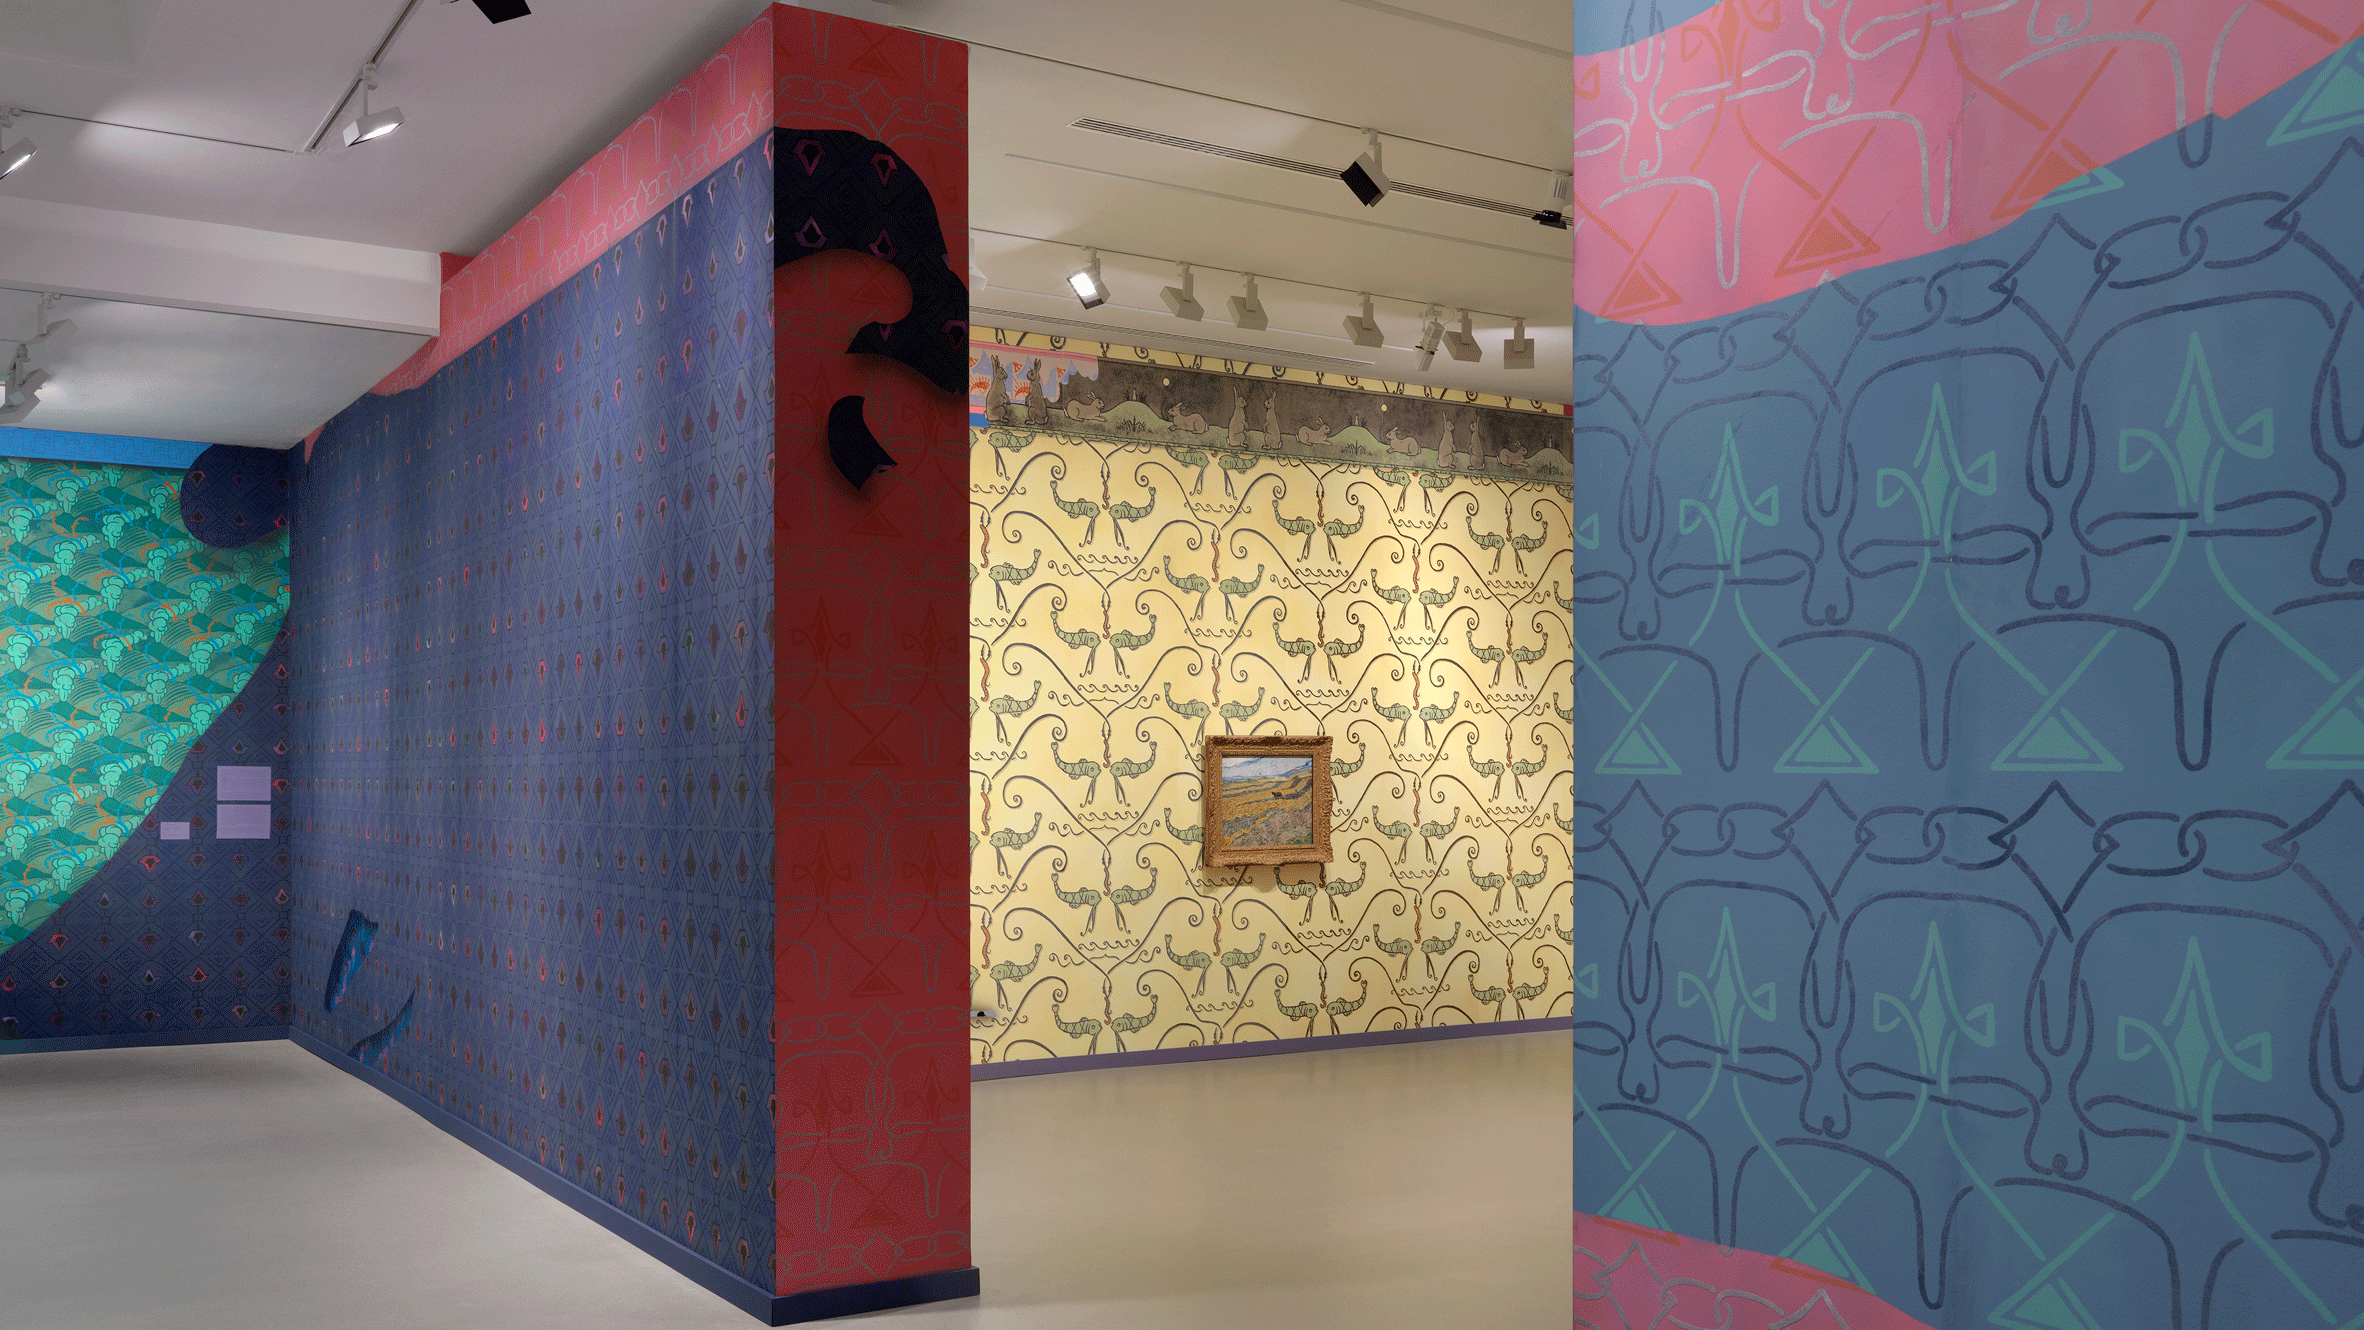 Colorful patterned wallpaper at the Laura Owens and Vincent van Gogh exhibition